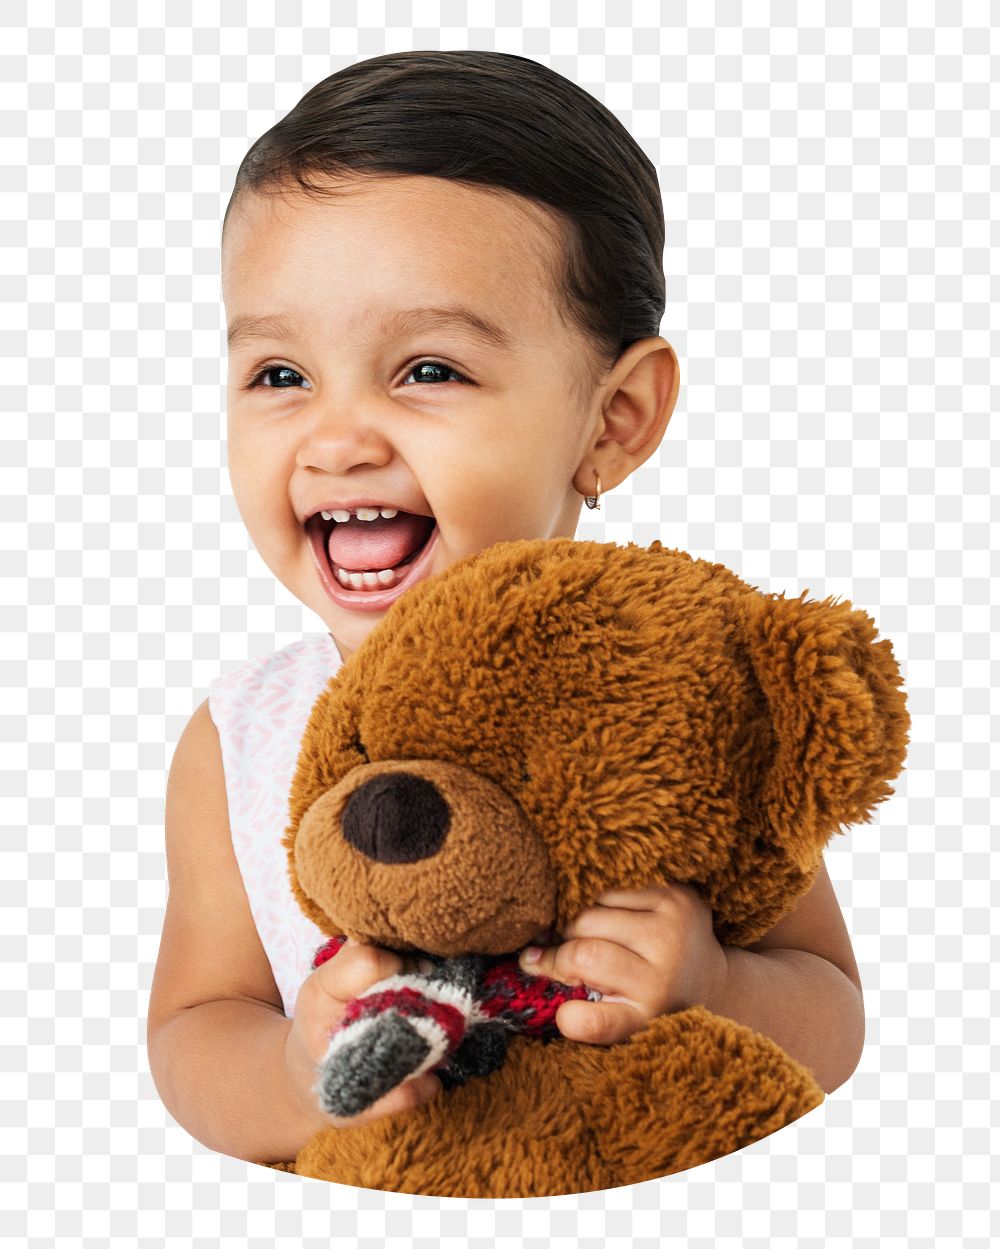 Girl holding teddy png, transparent background